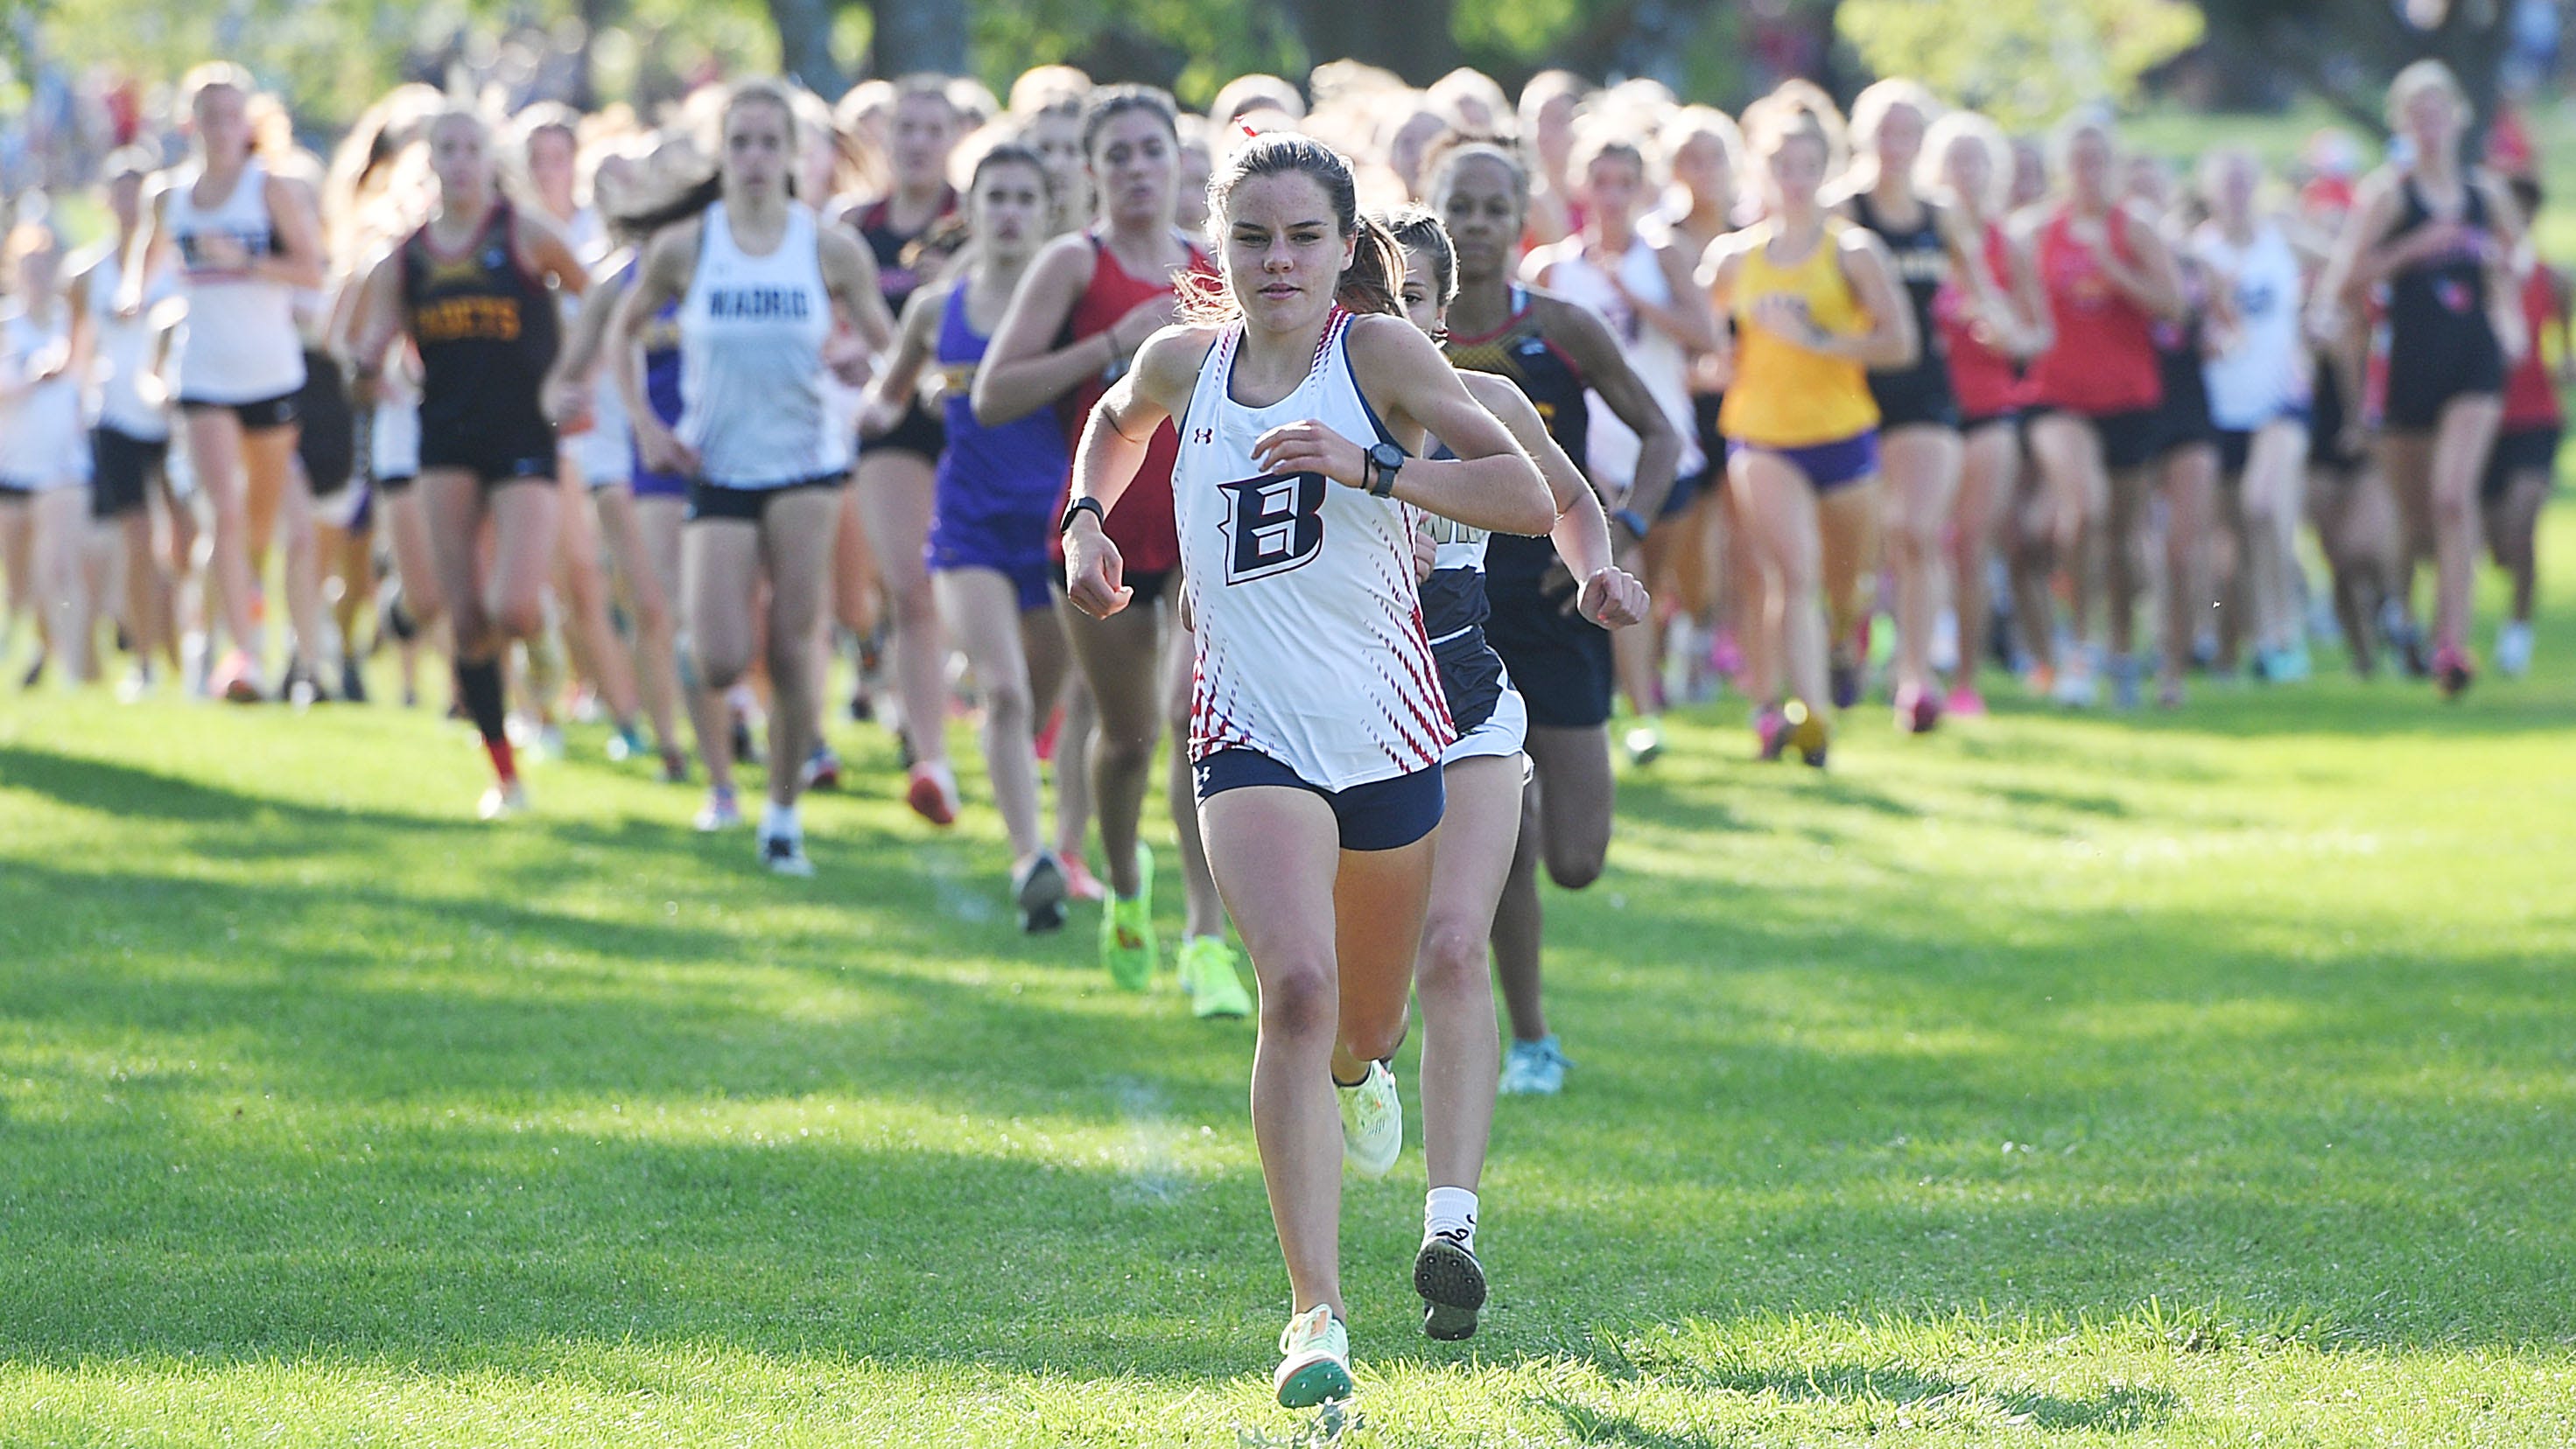 Paityn Noe going for history at Iowa girls state cross country meet